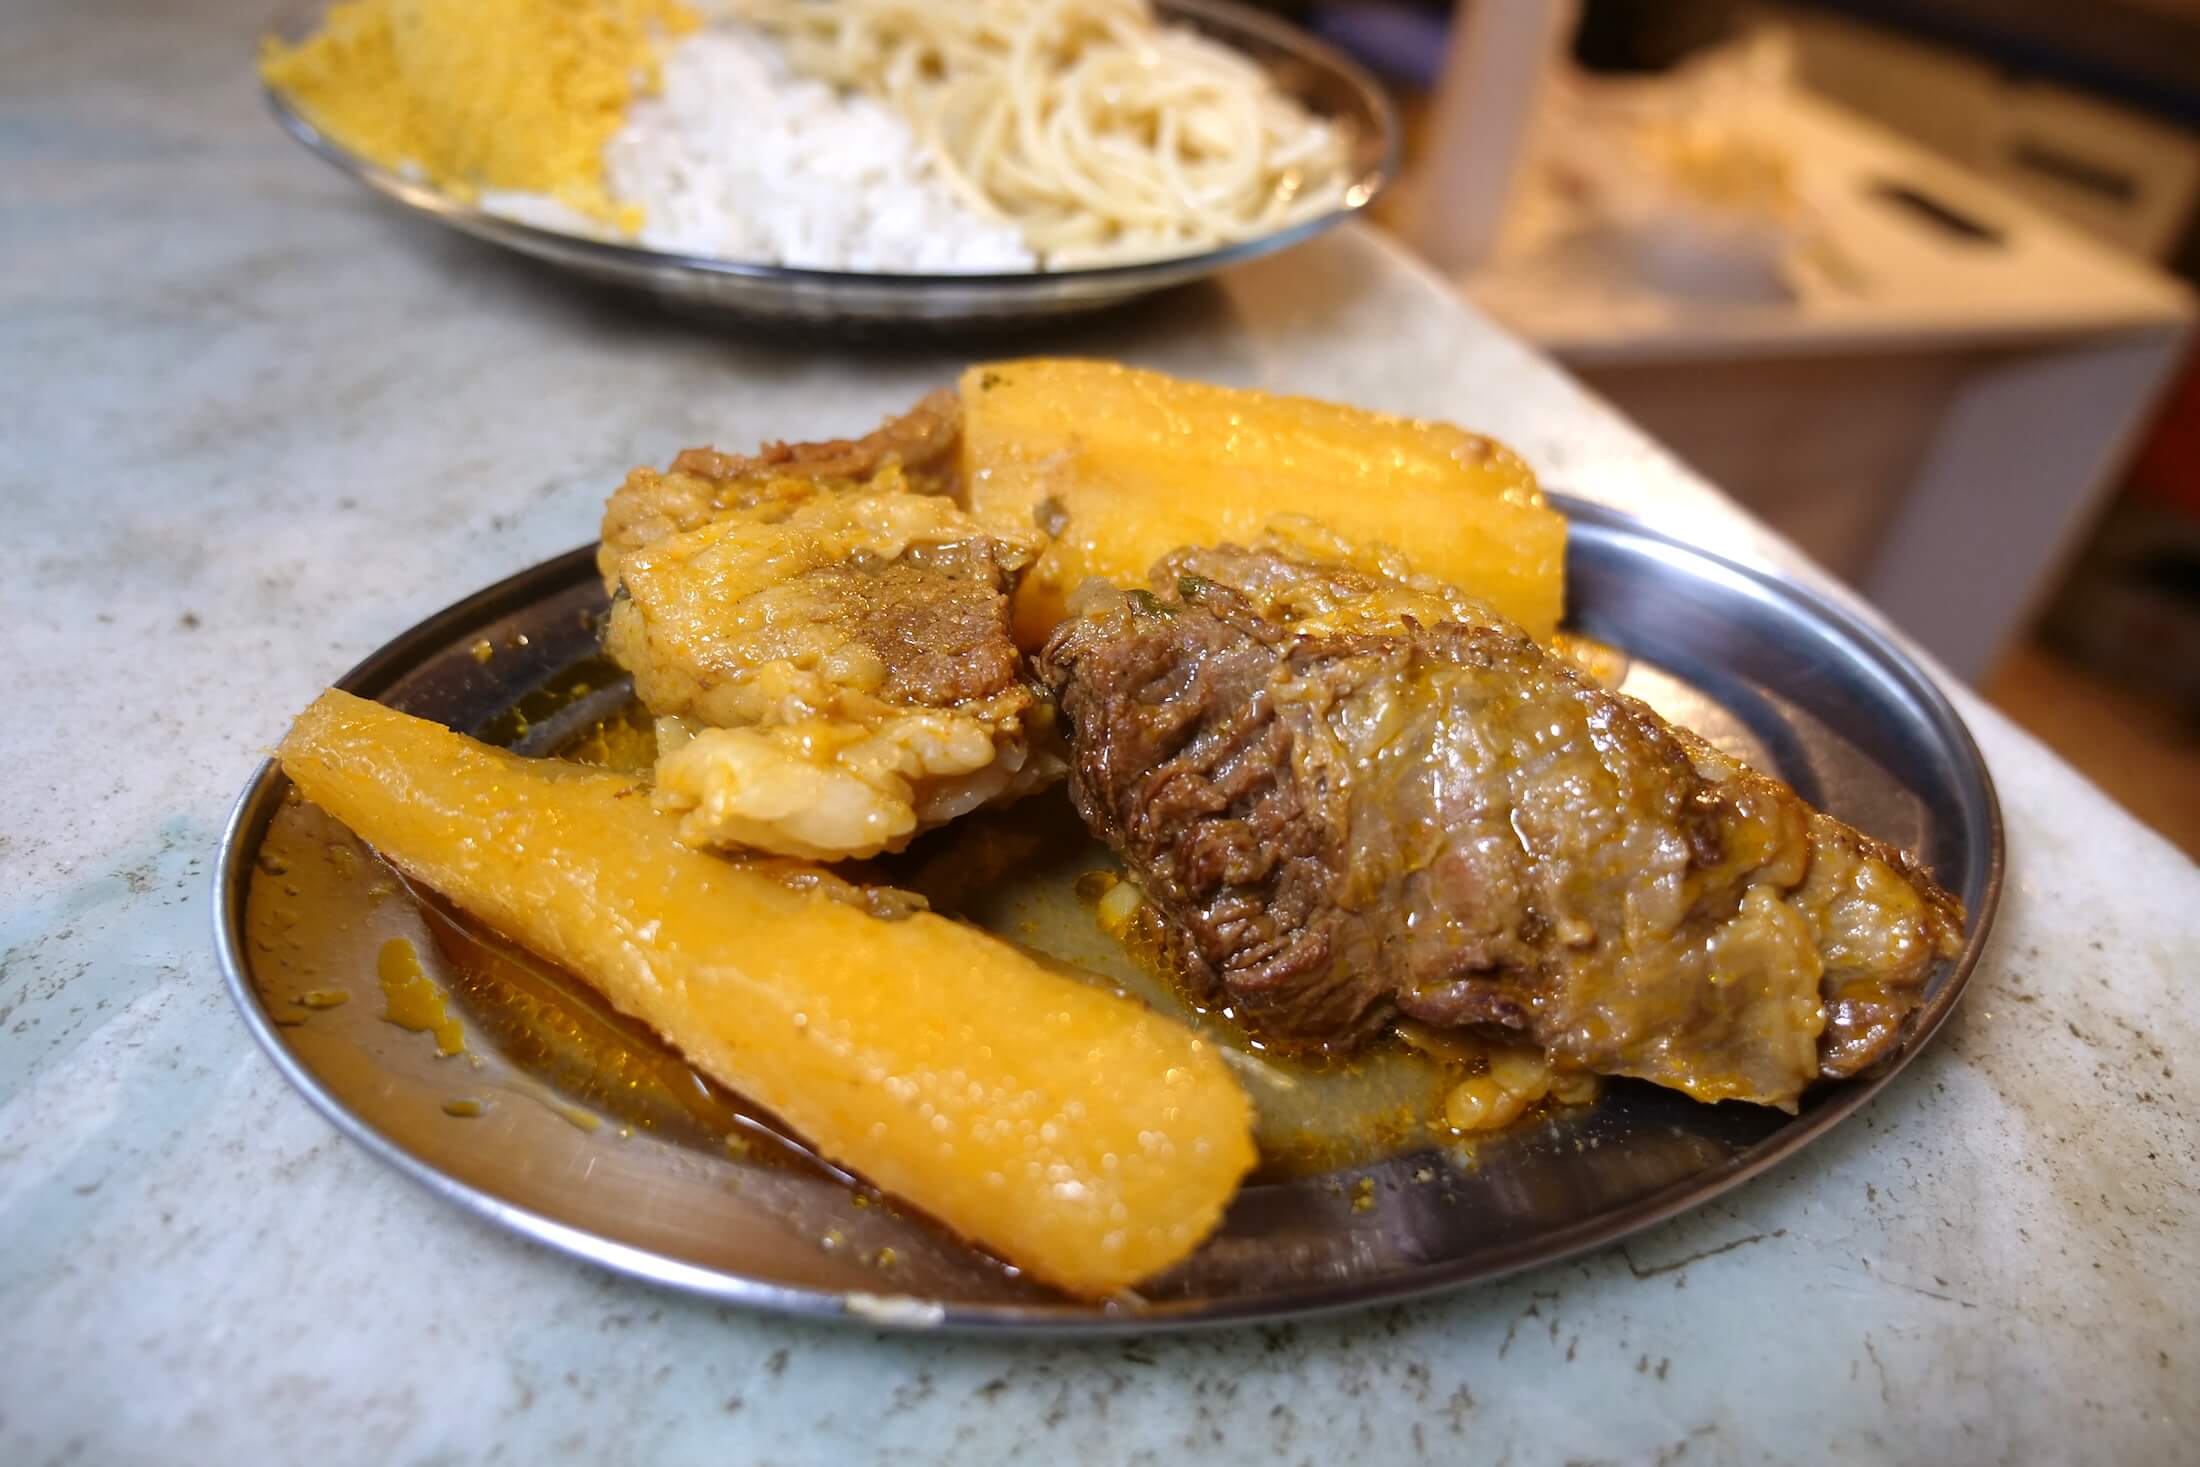 Wonderfully hearty meals of starch and meat, some of Brazils favorites